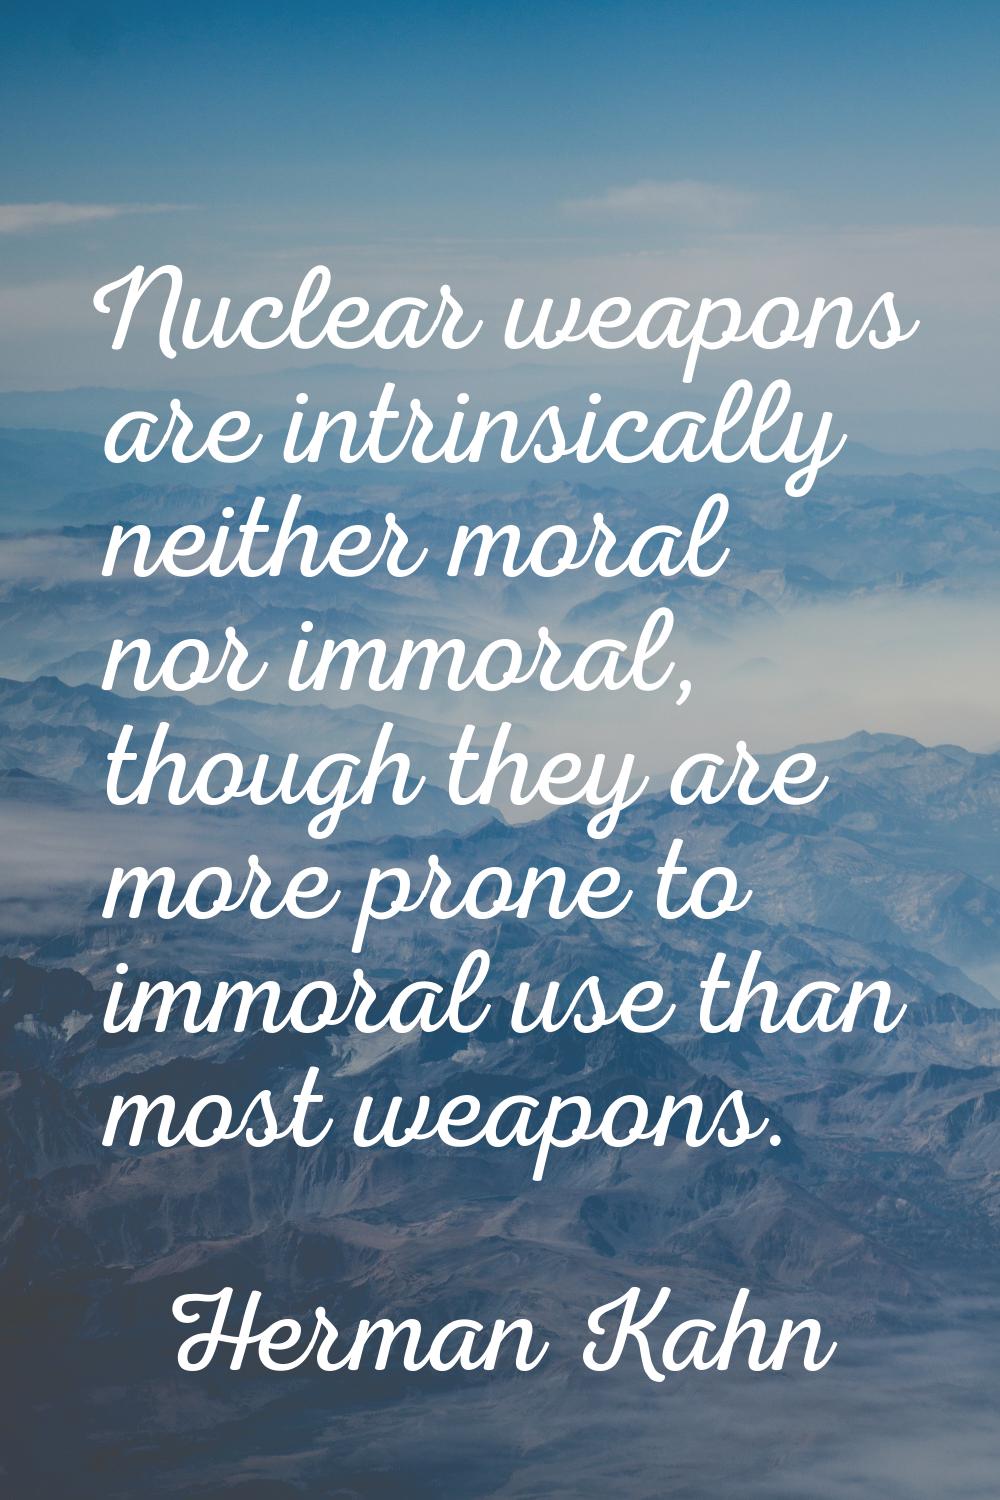 Nuclear weapons are intrinsically neither moral nor immoral, though they are more prone to immoral 